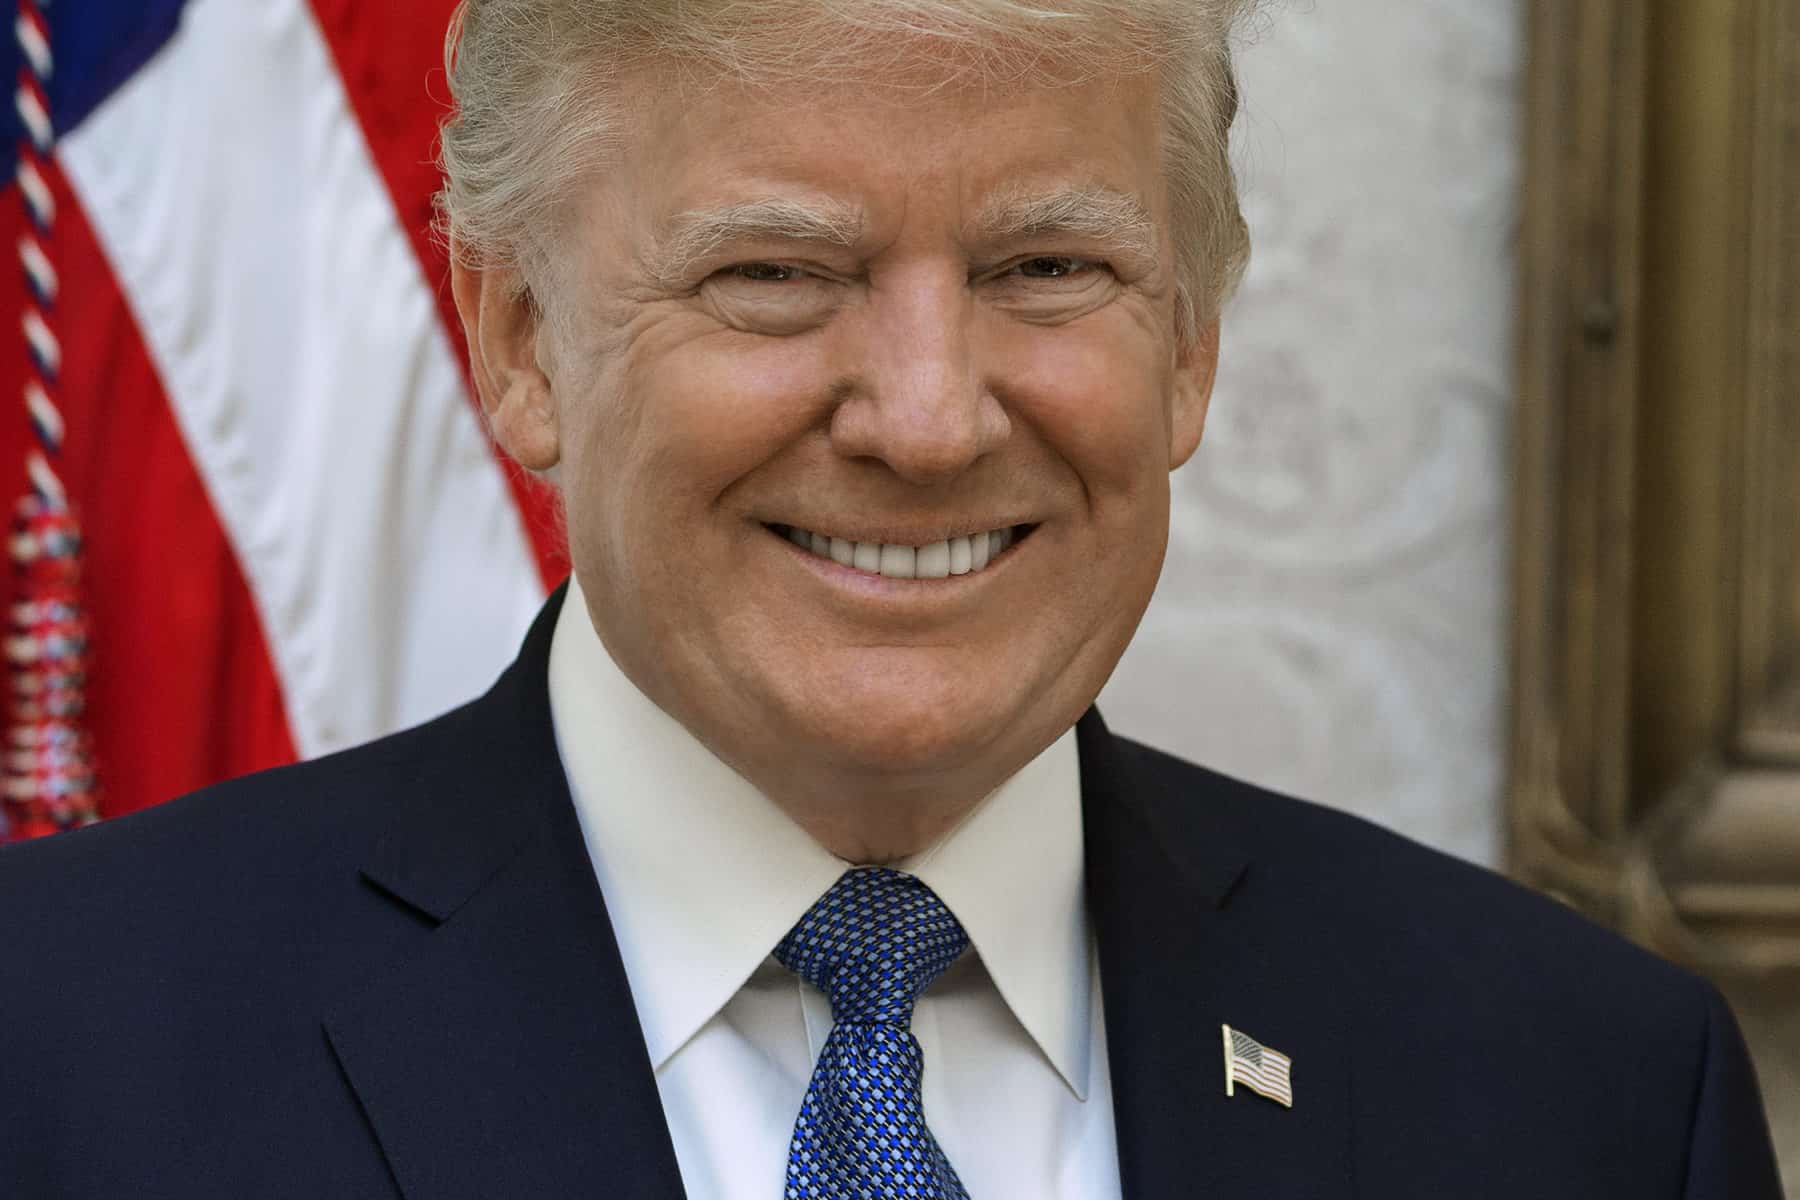 Official portrait of President Donald J. Trump, Friday, October 6, 2017.  (Official White House photo by Shealah Craighead)